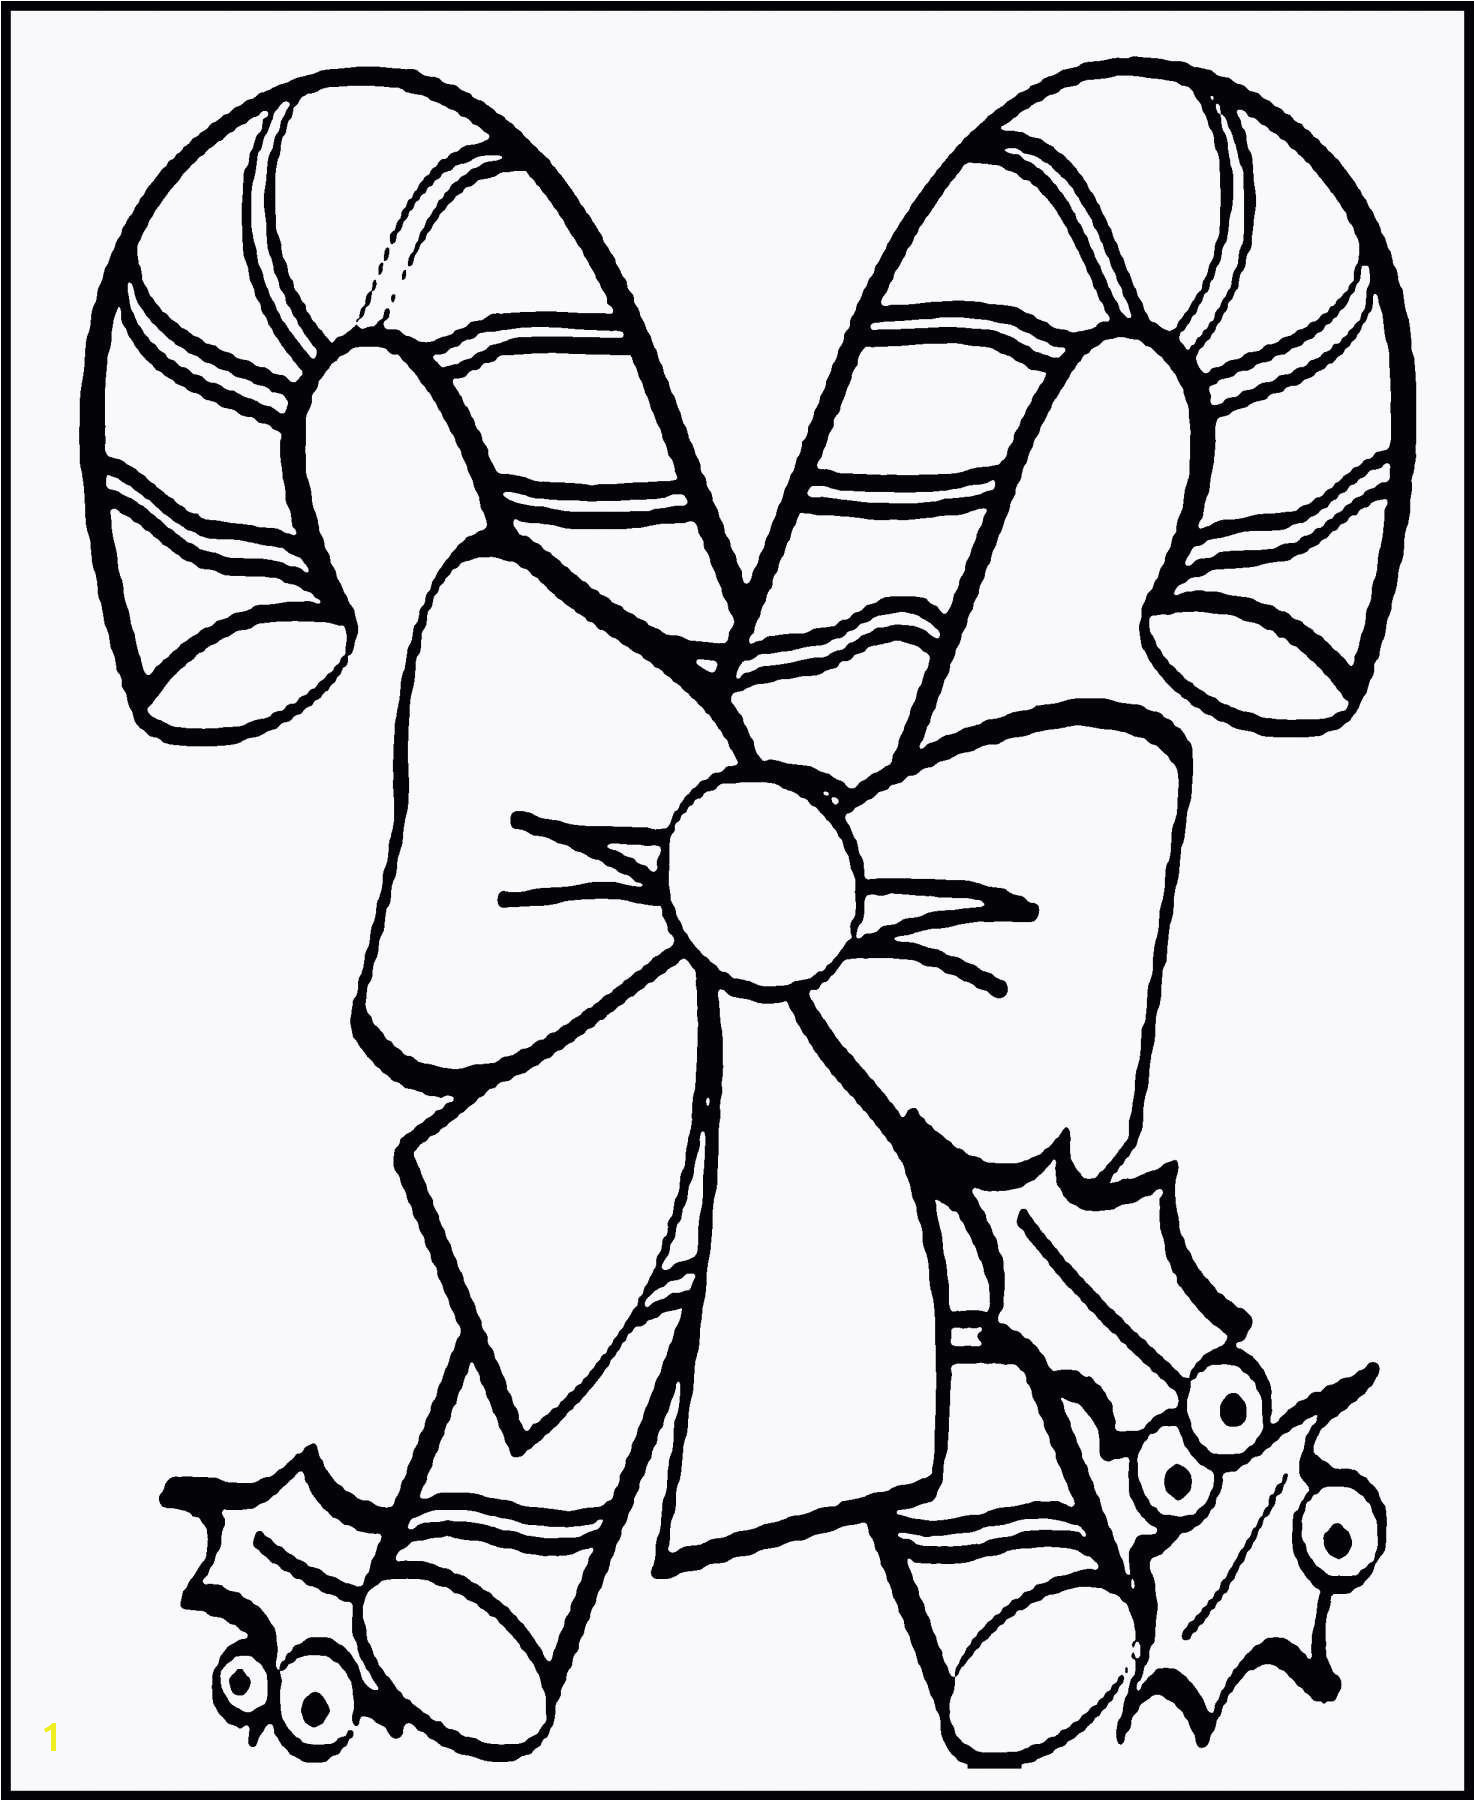 Free Printable Christmas Coloring Pages for Kindergarten Kindergarten Coloring Pages Printable Christmas Coloring Pages for